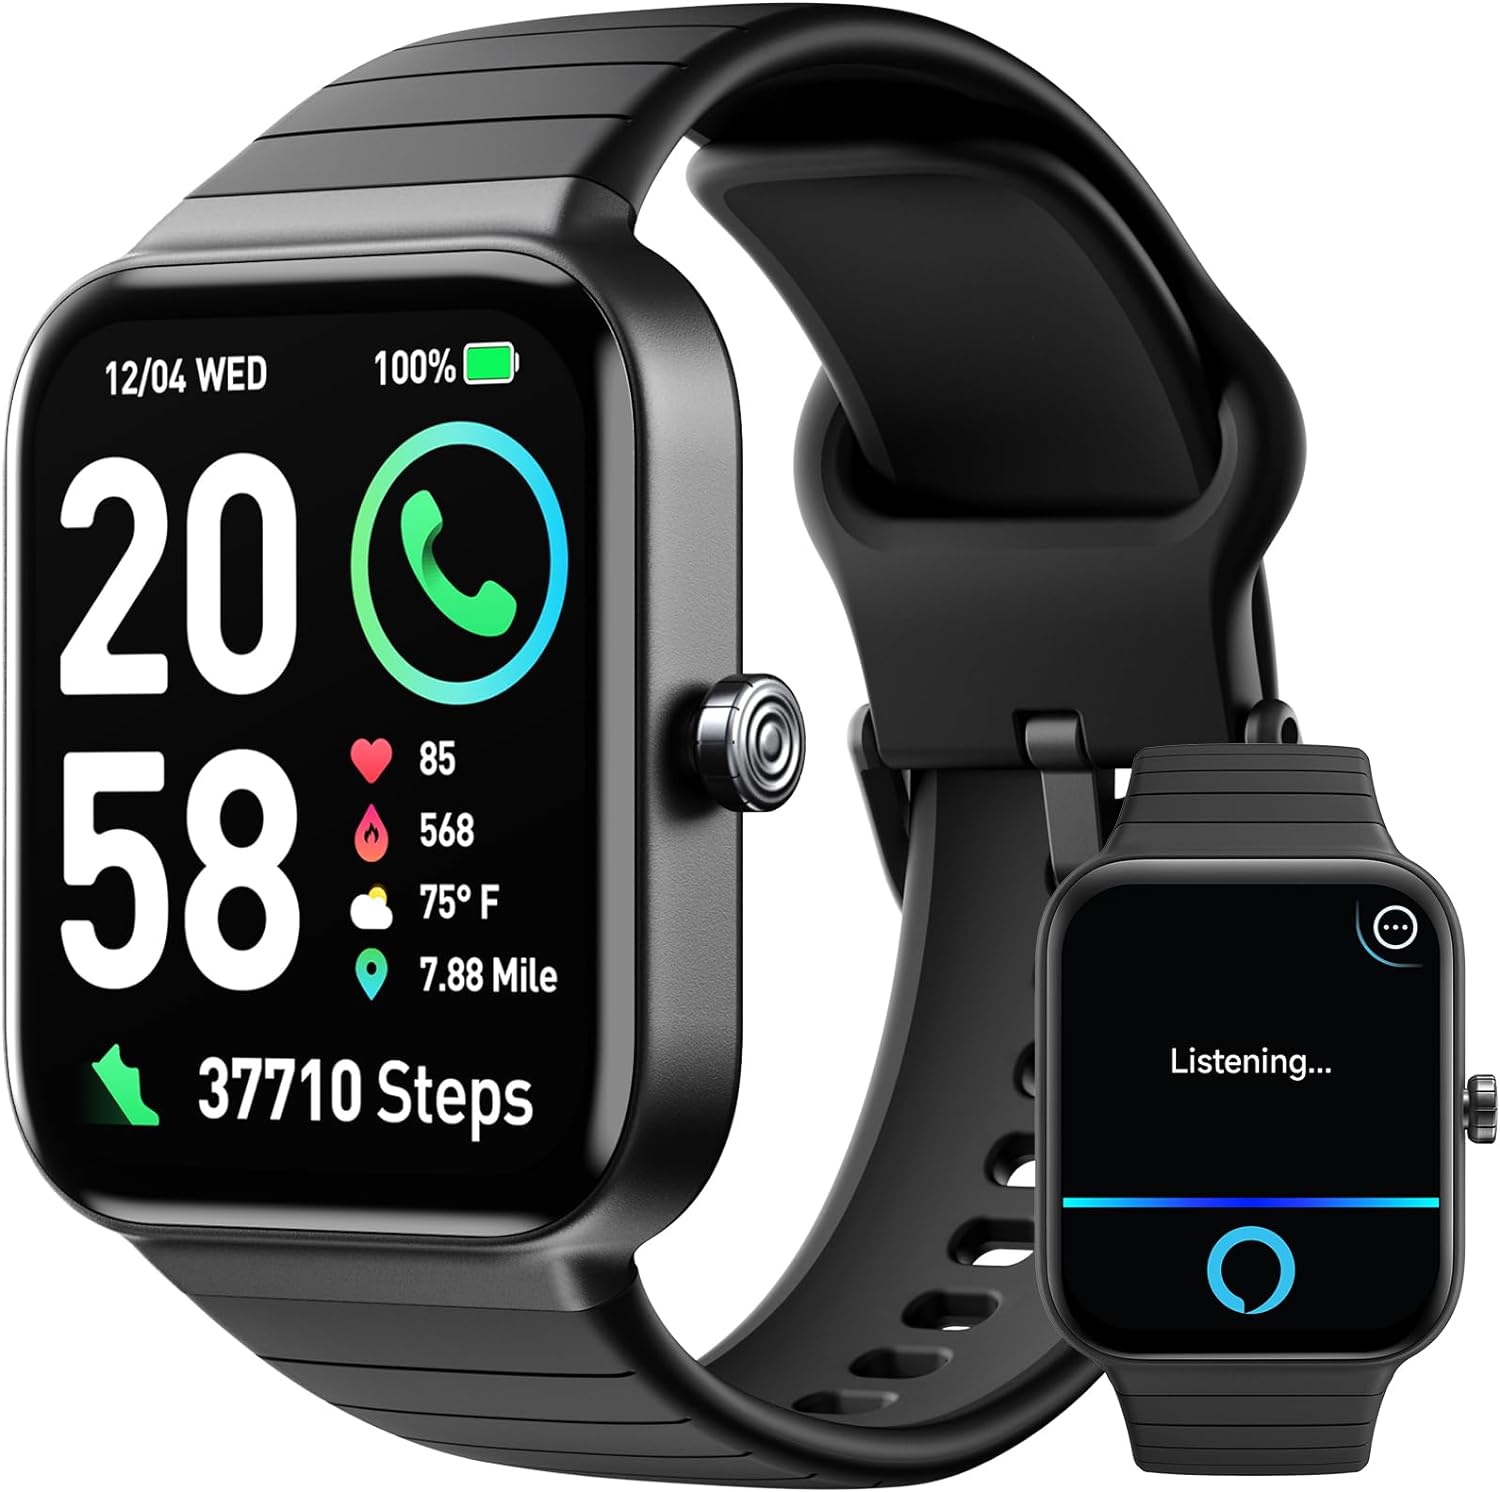 Smart Watch for Men Women(Bluetooth Answer/Make Call), Smartwatch Alexa Built-in, 1.8" Fitness Watch with Heart Rate/SpO2/Sleep Monitor/100 Sports/IP68 Waterproof, Activity Trackers (black)